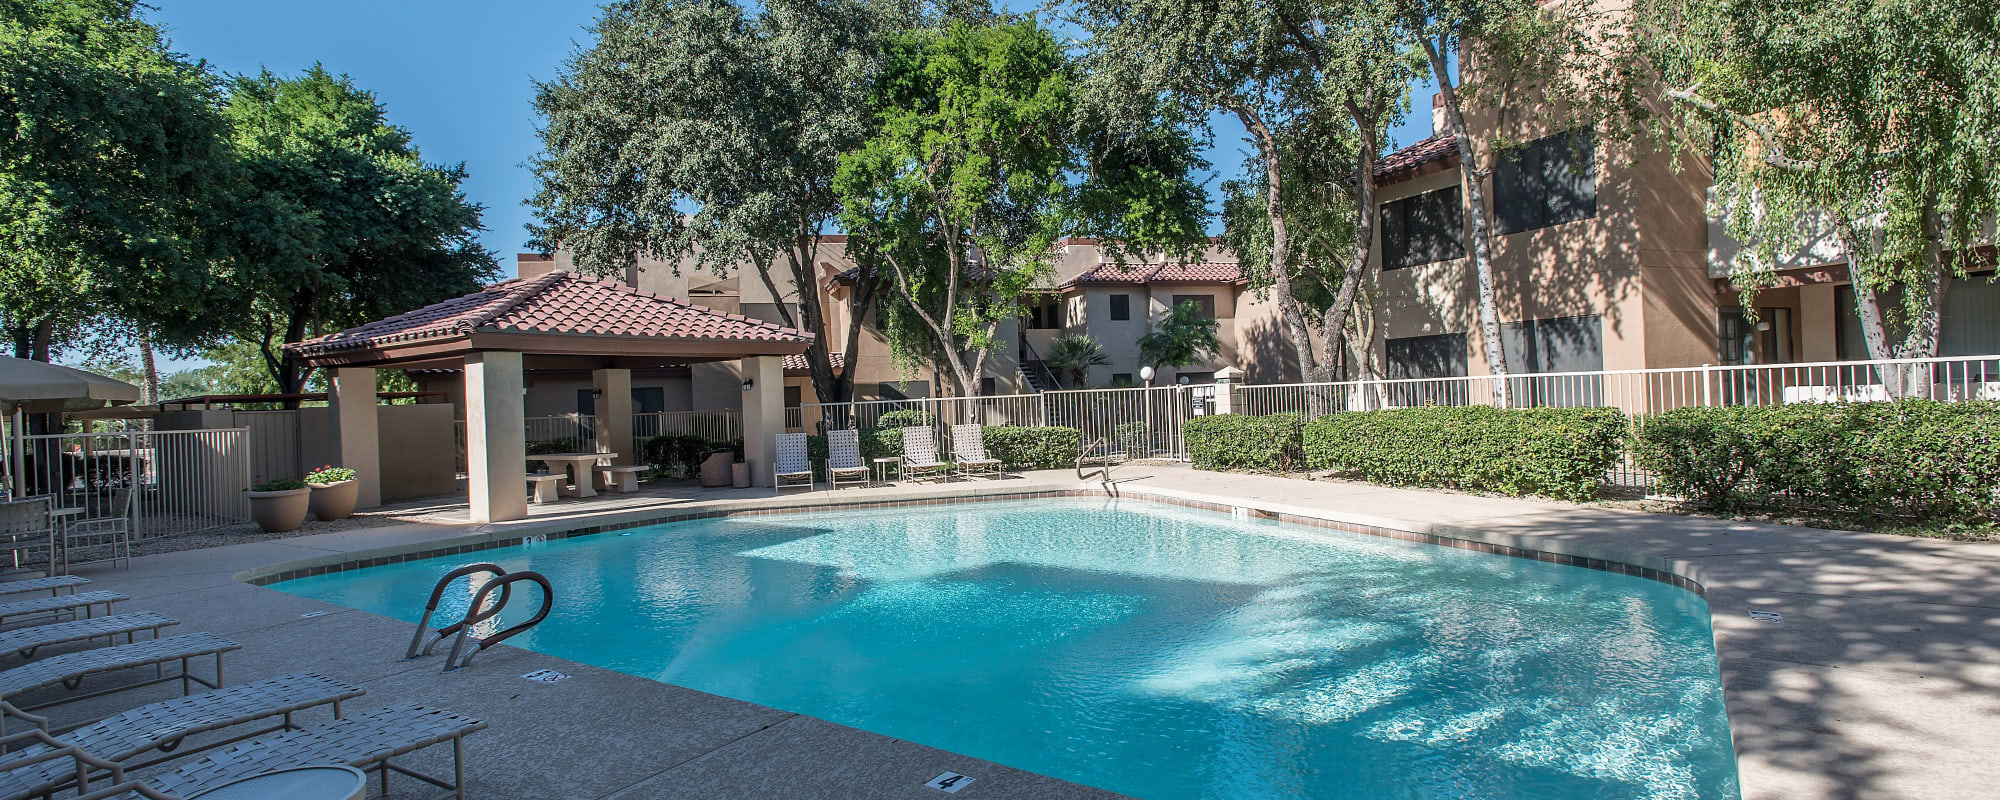 Schedule a tour of Scottsdale Highlands Apartments in Scottsdale, Arizona